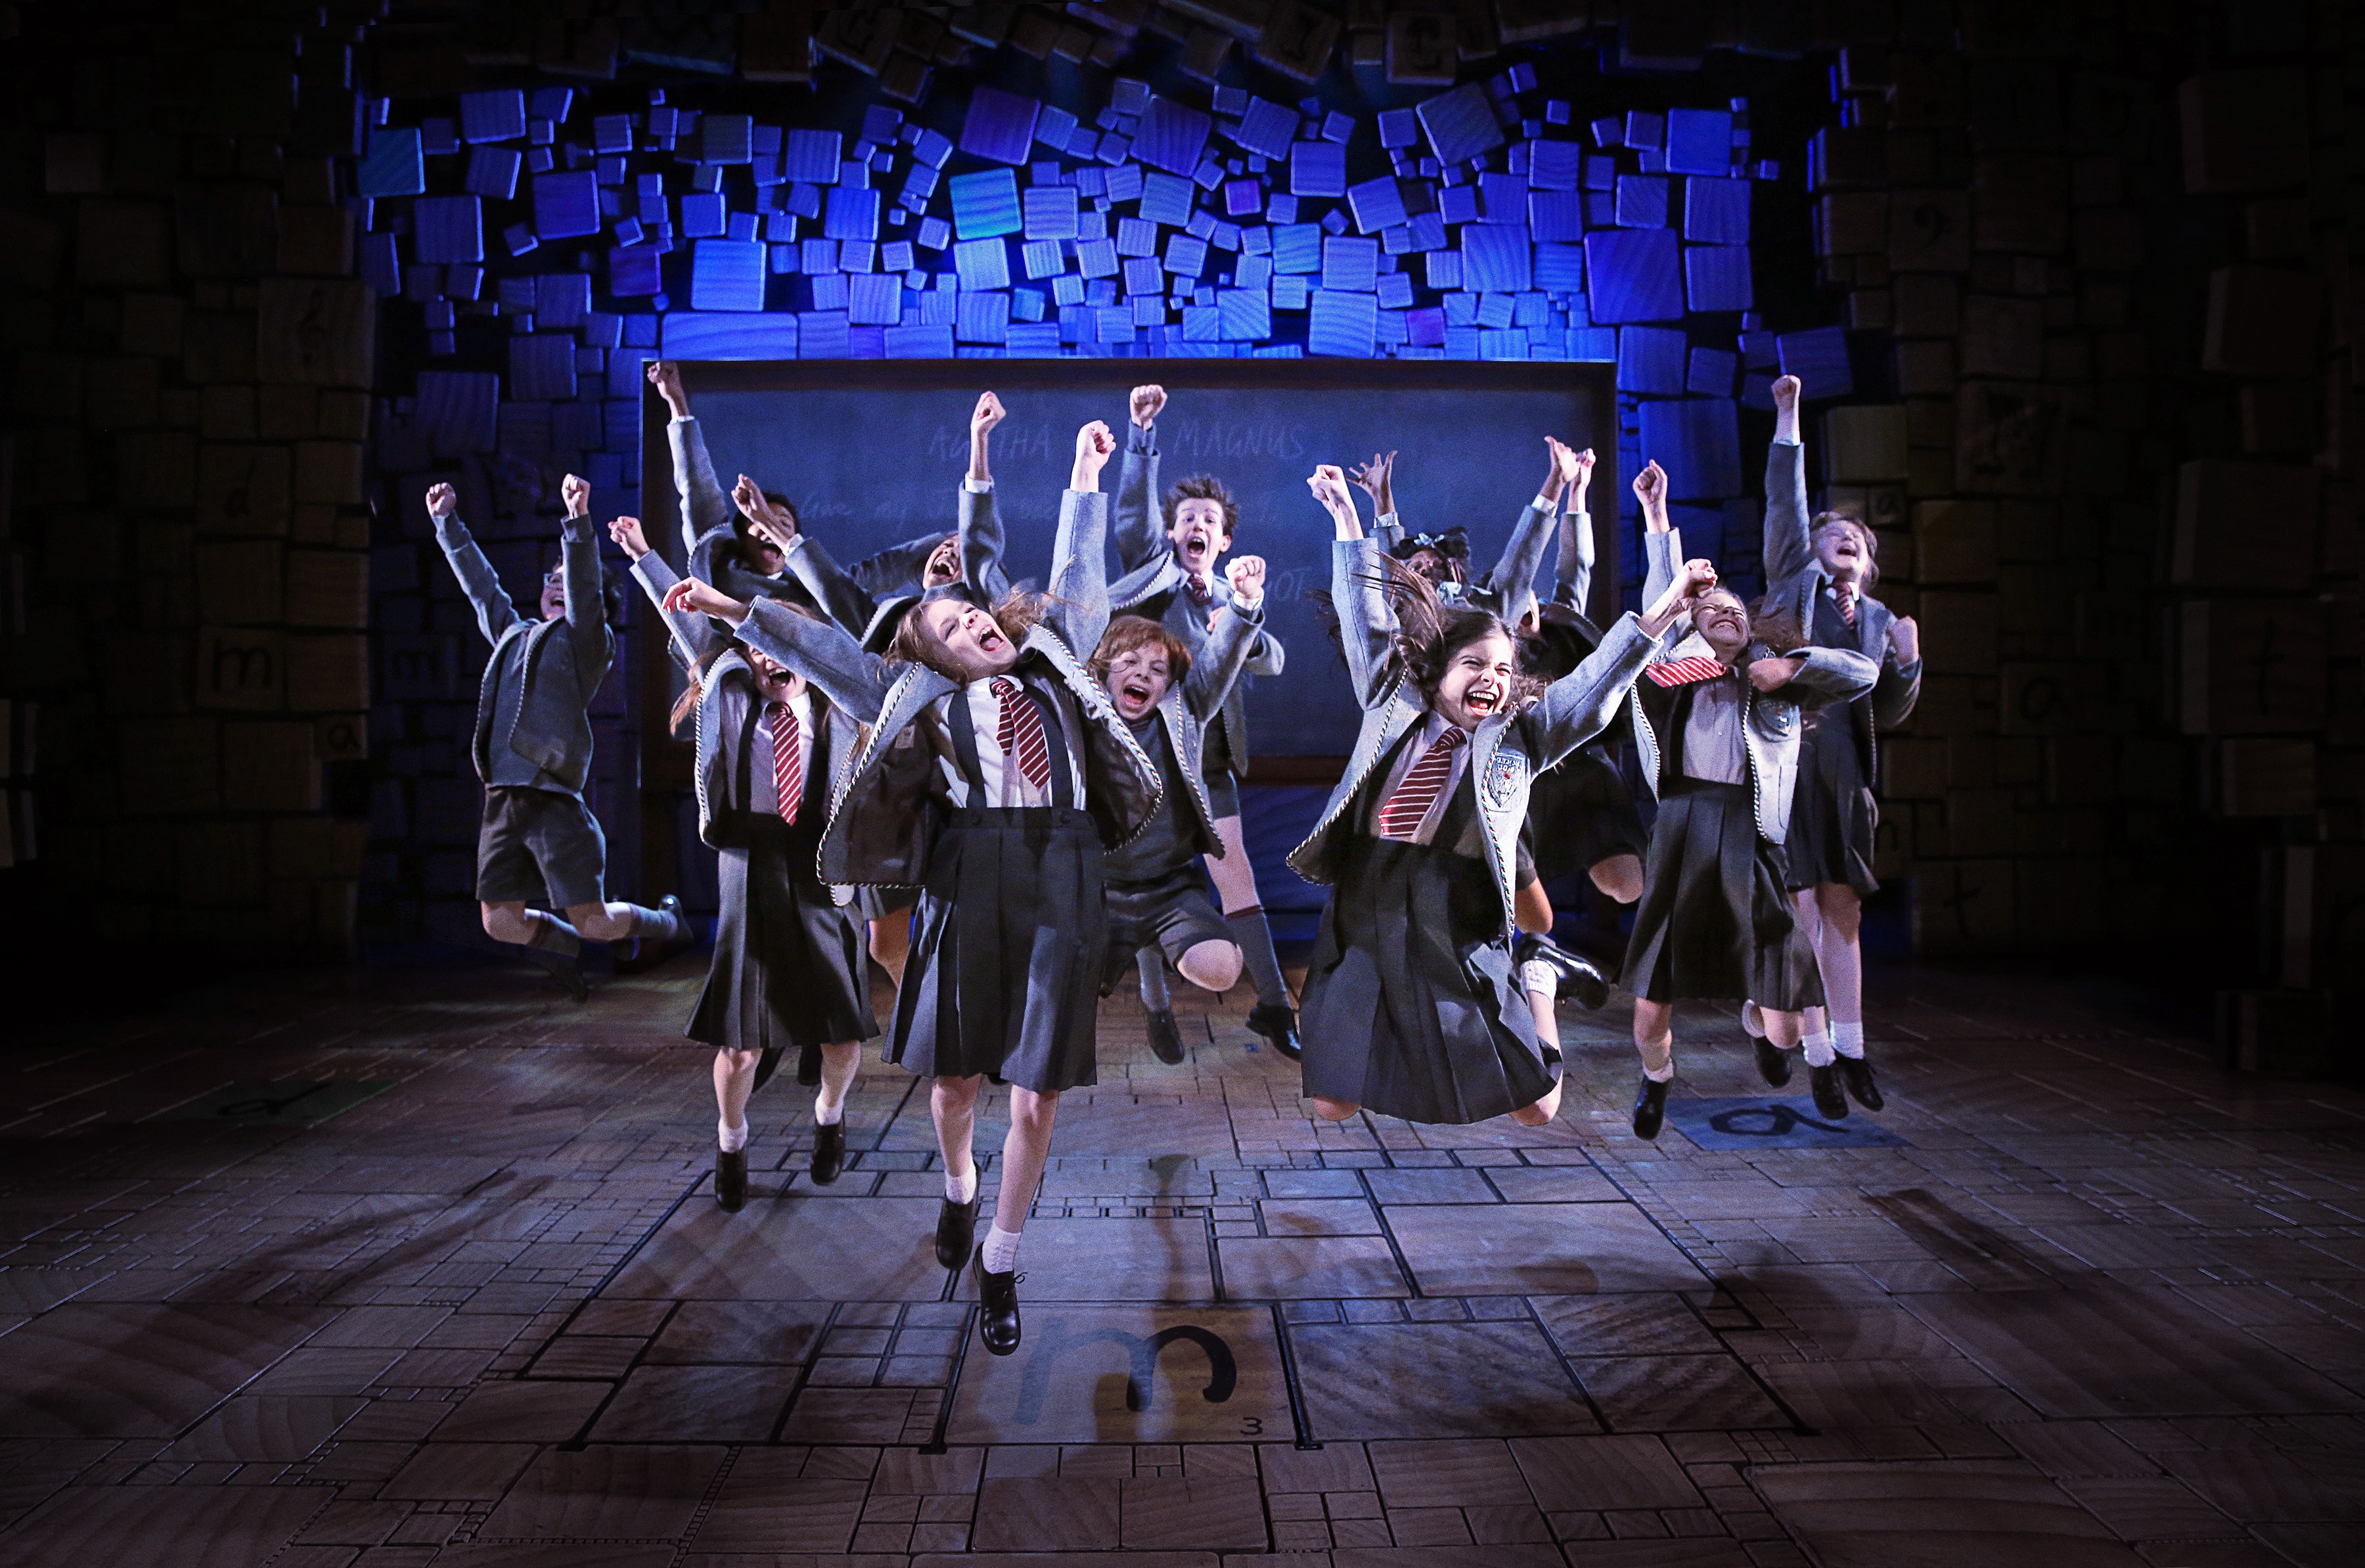 BROADWAY IN CHICAGO ANNOUNCES 15th SEASON INCLUDING "IF/THEN" AND "MATILDA" 1 Broadway In Chicago is thrilled to announce the upcoming 2015-2016 season line-up celebrating Broadway In Chicago's 15thanniversary.  The hits just keep on coming to Chicago with the Pre-Broadway World Premiere of GOTTA DANCE and Tony® Award-winning musicals A GENTLEMAN’S GUIDE TO LOVE & MURDER, CABARET and MATILDA THE MUSICAL plus IF/THEN and DIRTY DANCING.  The 2015-2016 season will go on saleSunday, March 8. To renew or purchase a new subscription, please visit BroadwayInChicago.com or call 312-977-1717.  Subscriber benefits include savings of up to 50% off ticket prices, discounts on both parking and suite service, invitations to Broadway In Chicago exclusive events, free exchange privileges and more.  The Broadway In Chicago 2015-2016 Season line-up, including performance dates and venues, is as follows: